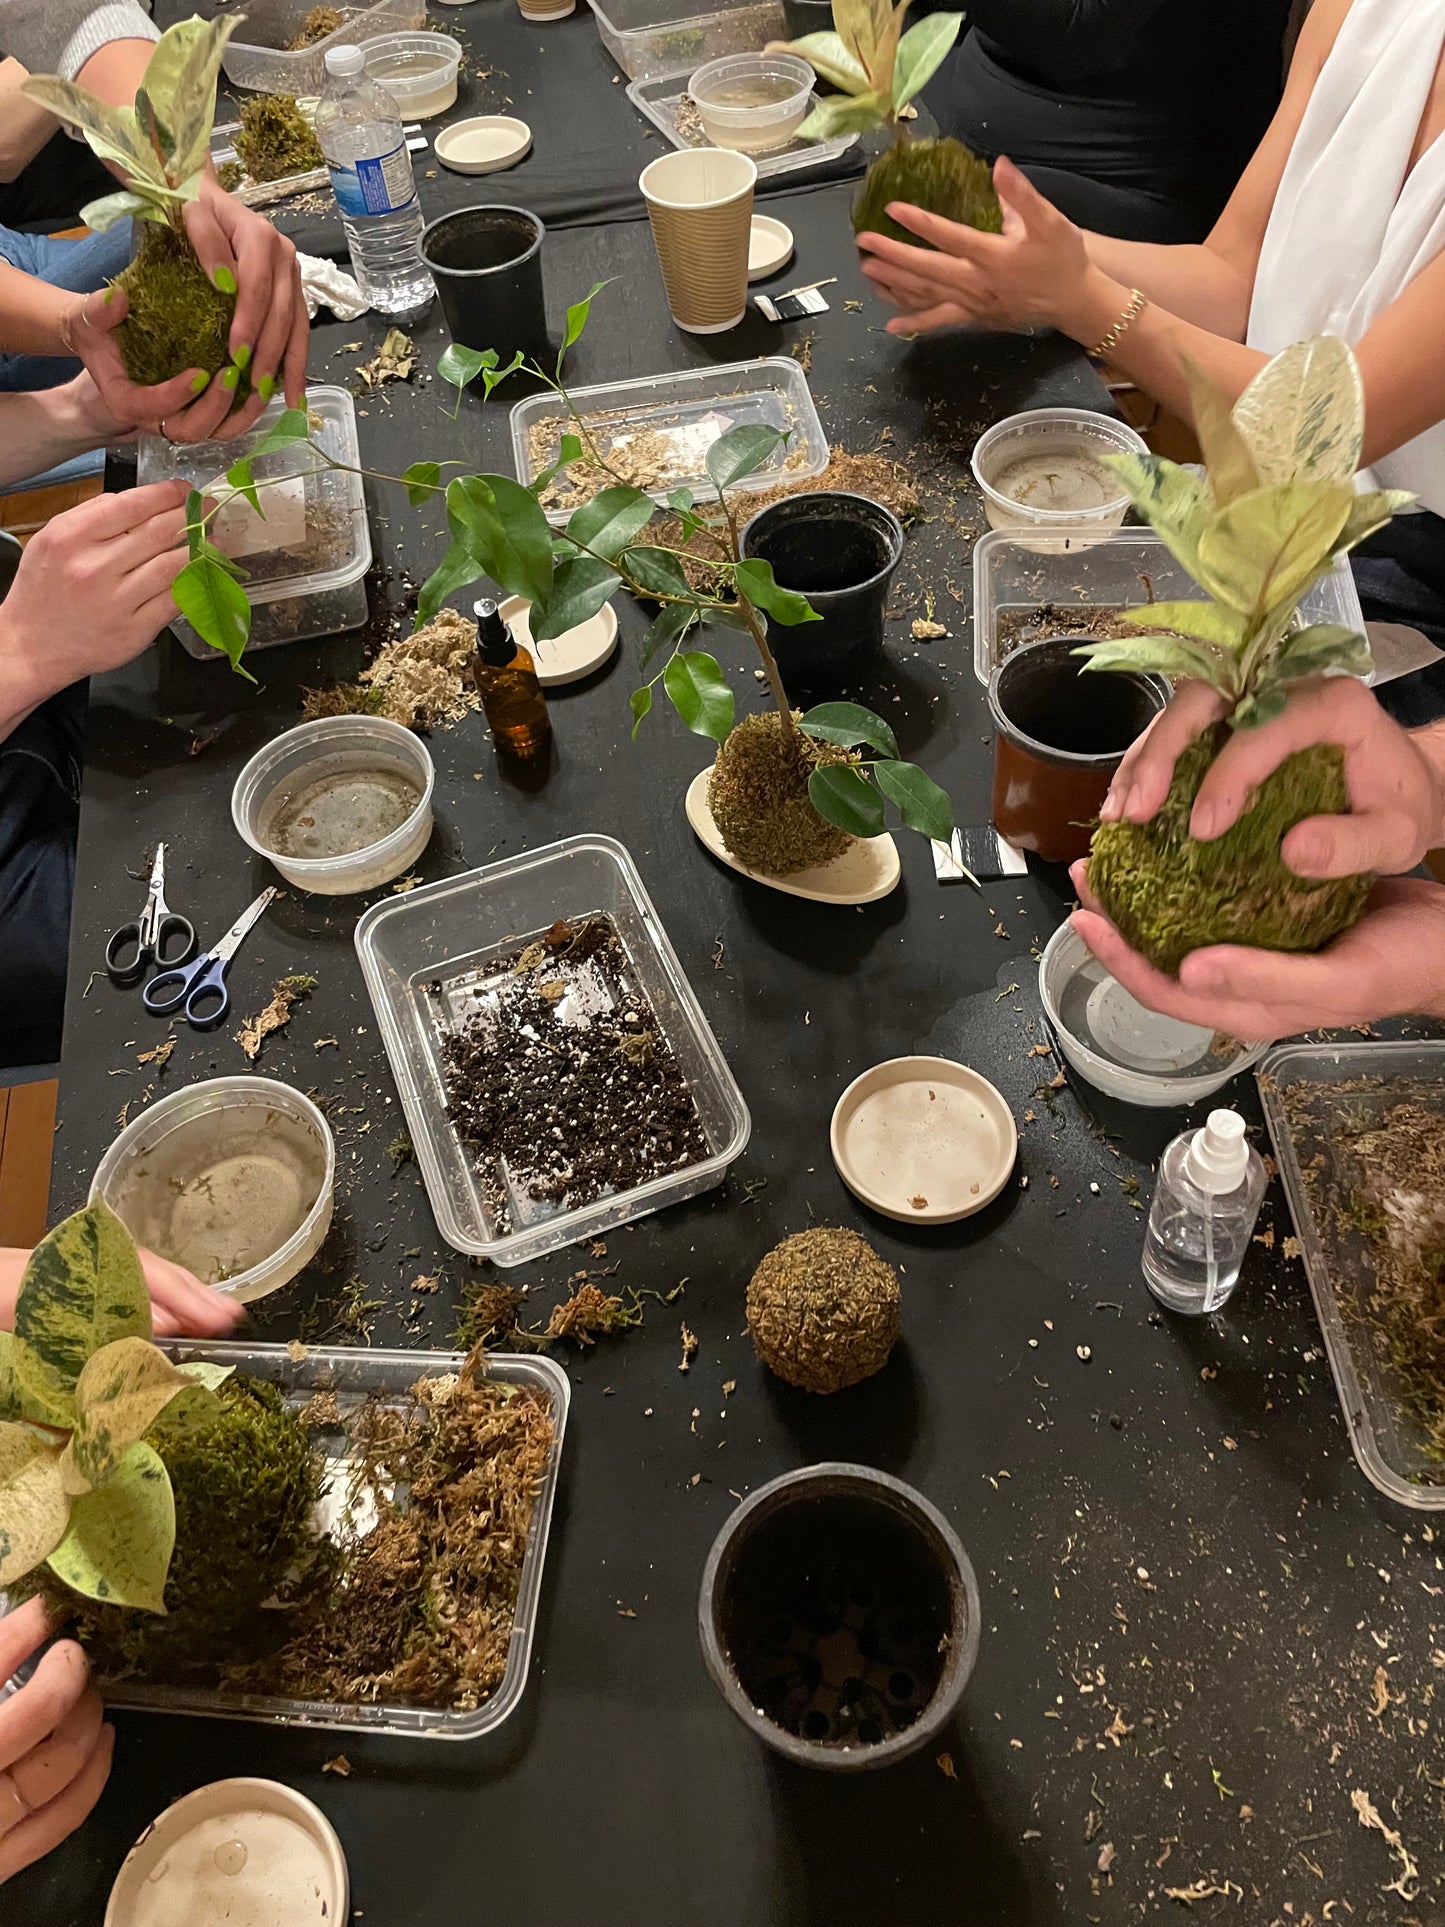 SOLD OUT Kokedama workshop: May 12 @ 10:30am